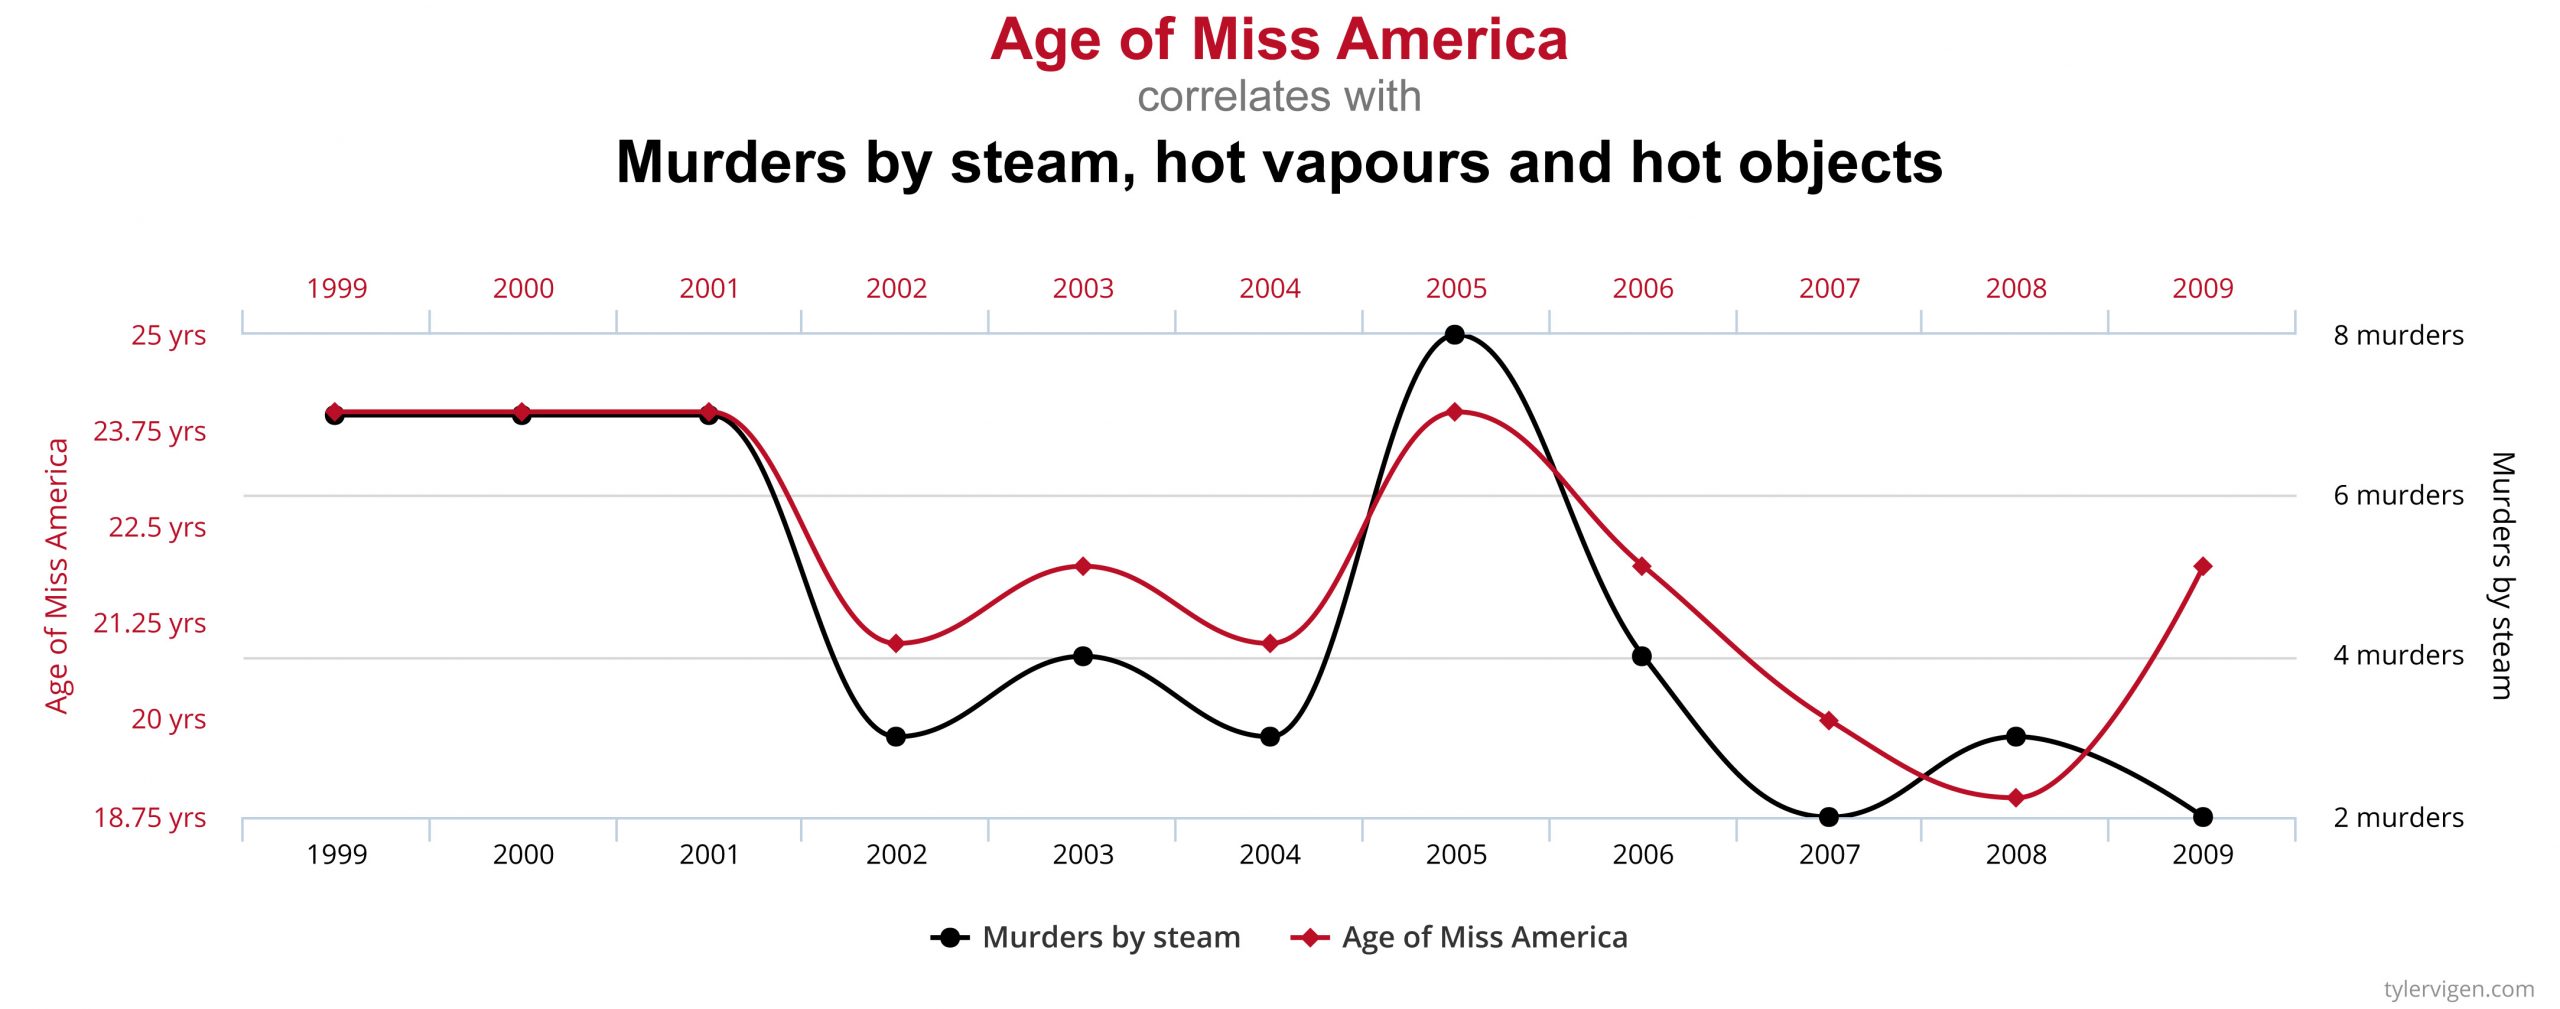 A chart showing a correlation between the age of Miss America, and the number of Murders by steam, hot vapours, and hot objects.